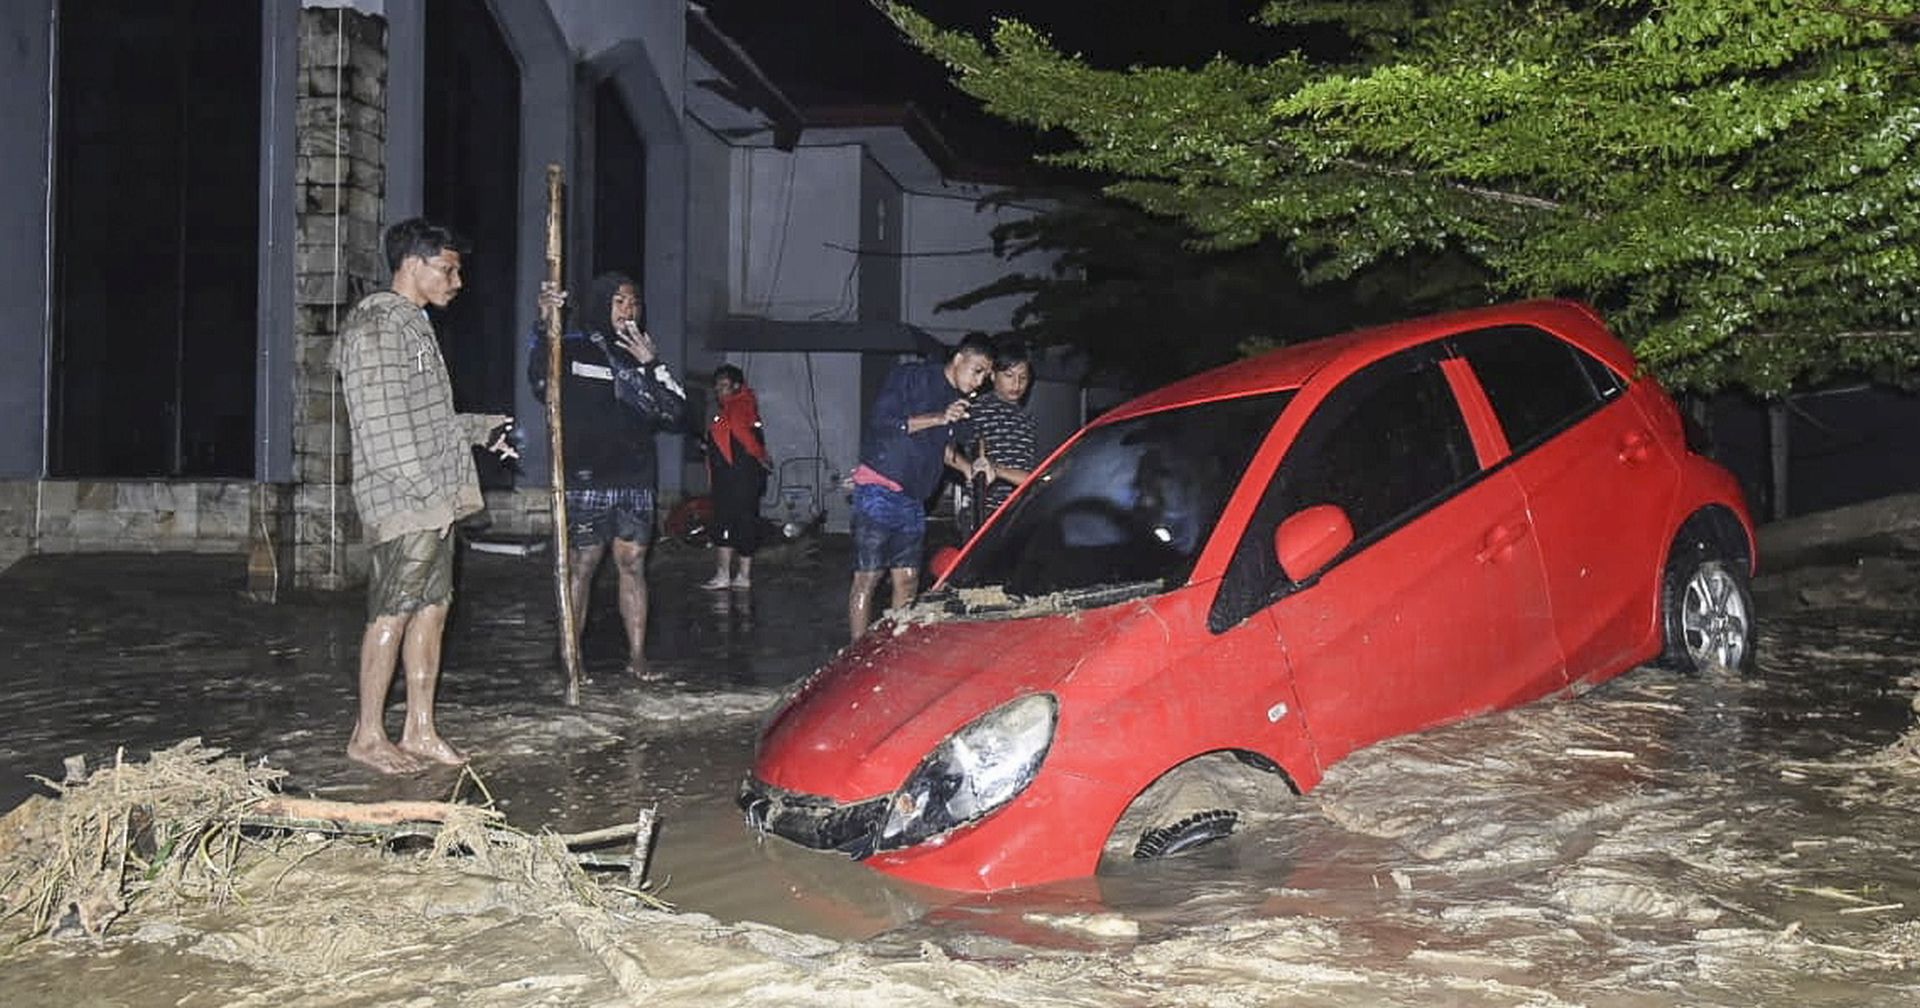 epa08545089 People inspect a damage car after it was hit by flash floods in Mssamba, Luwu Utara, South Sulawesi, Indonesia, 14 July 2020. According to Indonesian National Board for Disaster Management (BNPB), at least 10 people are dead and dozens of others missing.  EPA/STR